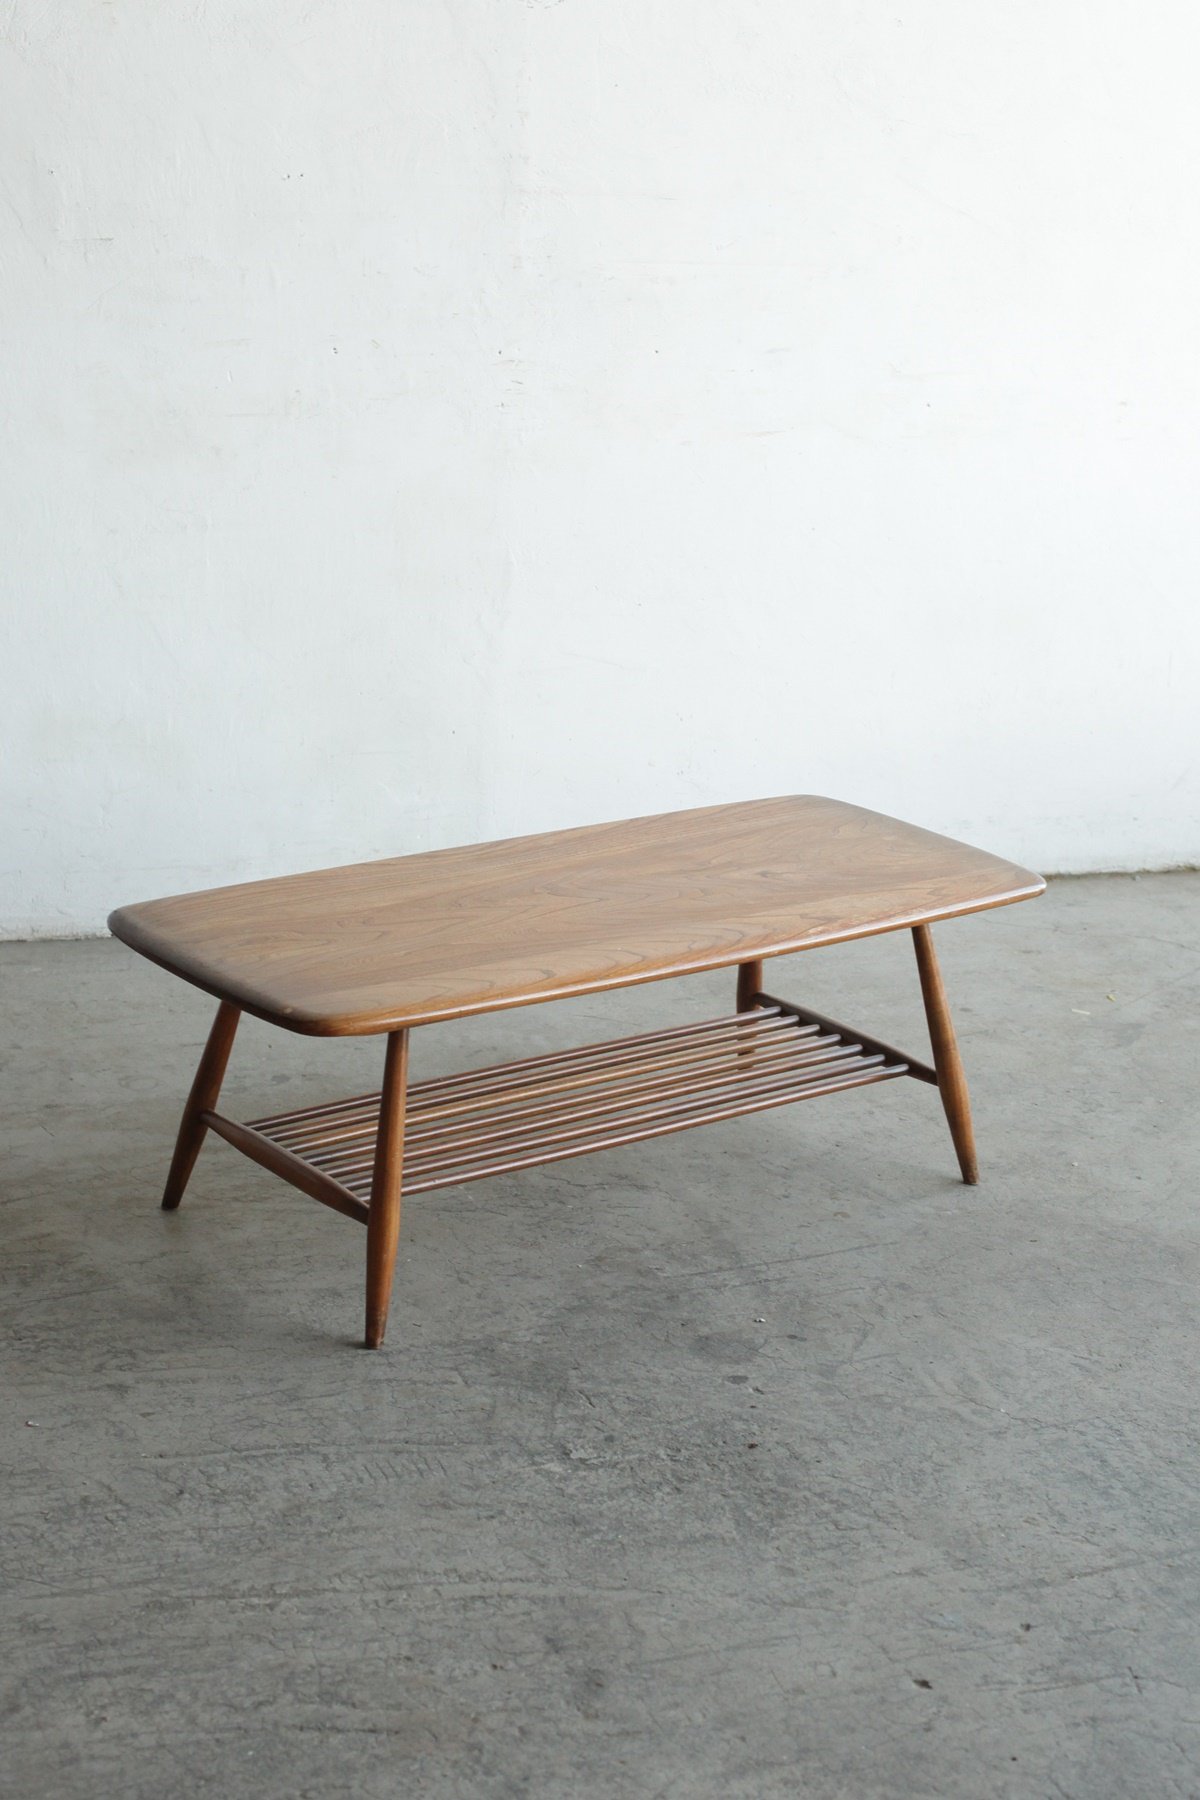 ERCOL coffee table[DY] - Antiques & Repair eel